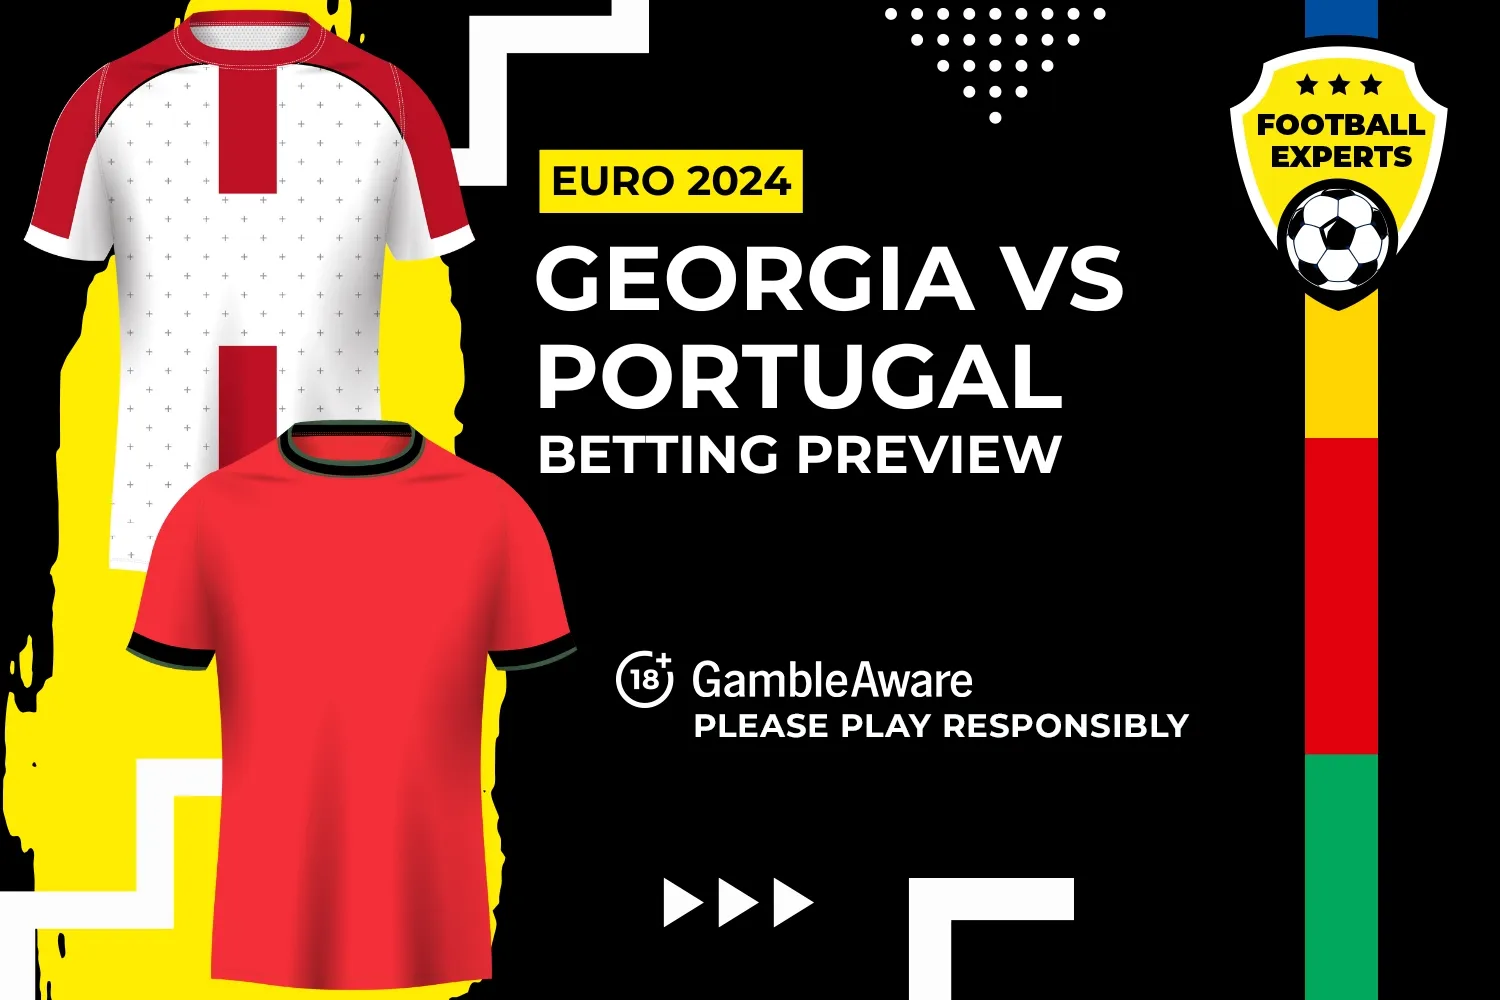 Georgia vs Portugal predictions, odds and betting tips